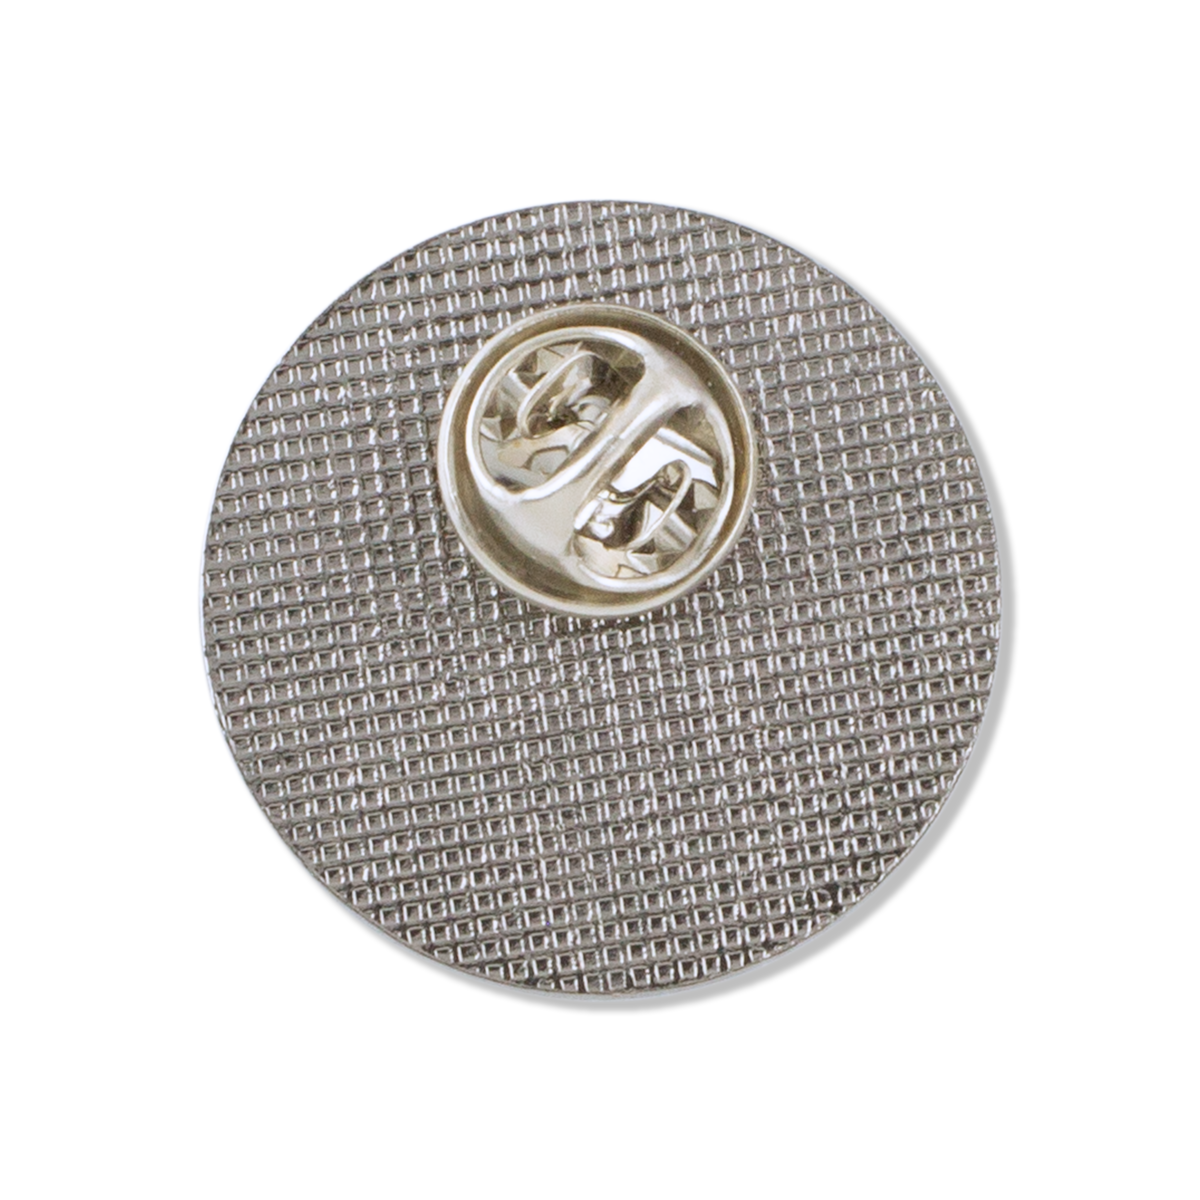 ALGEE Special Edition Lapel Pin